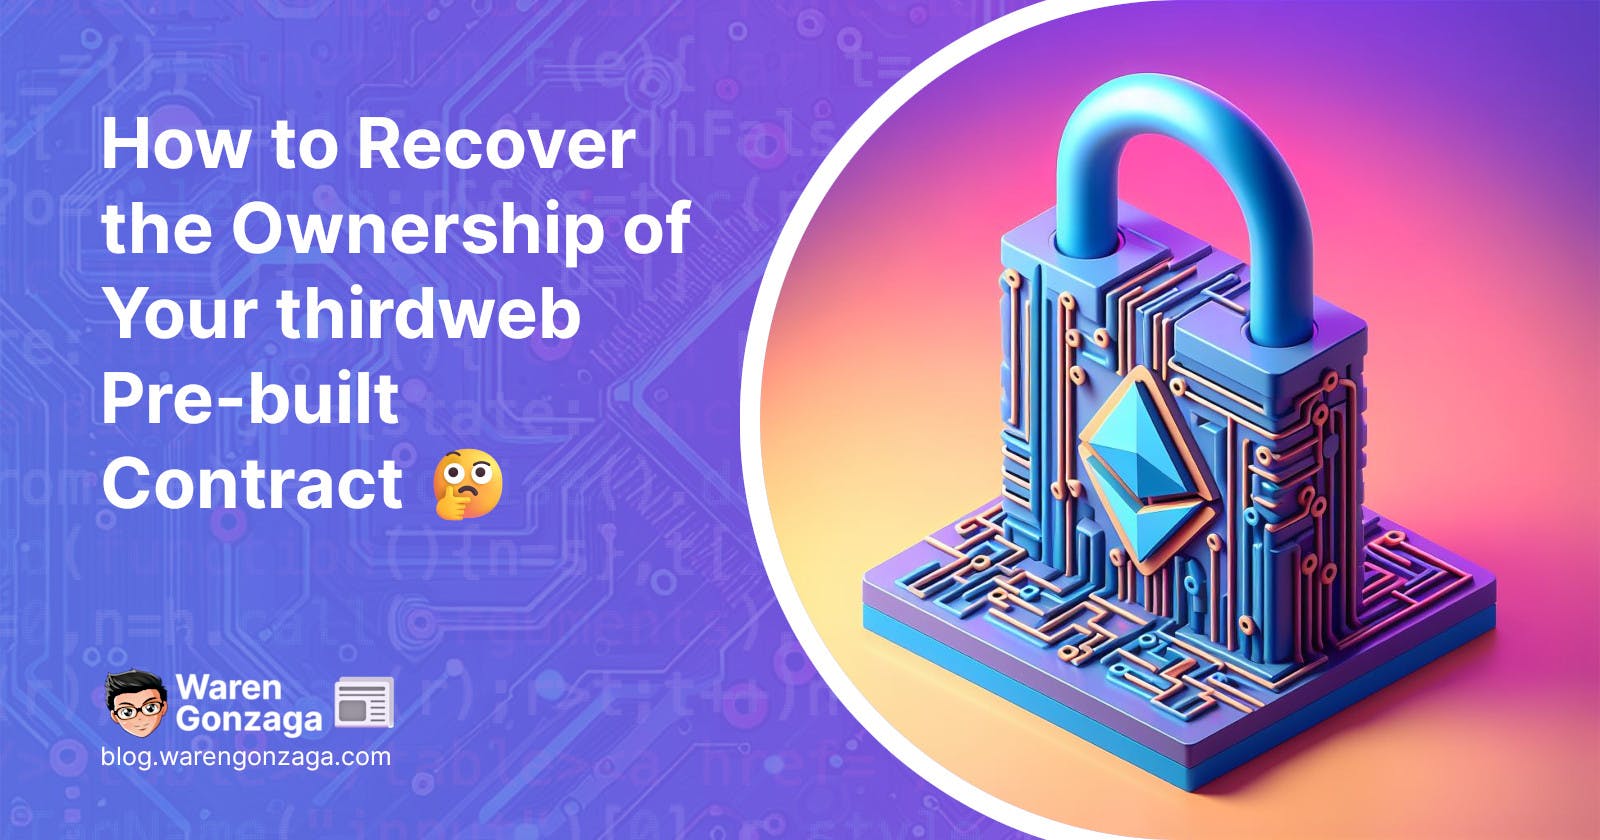 How to Recover the Ownership of Your thirdweb Pre-built Contract